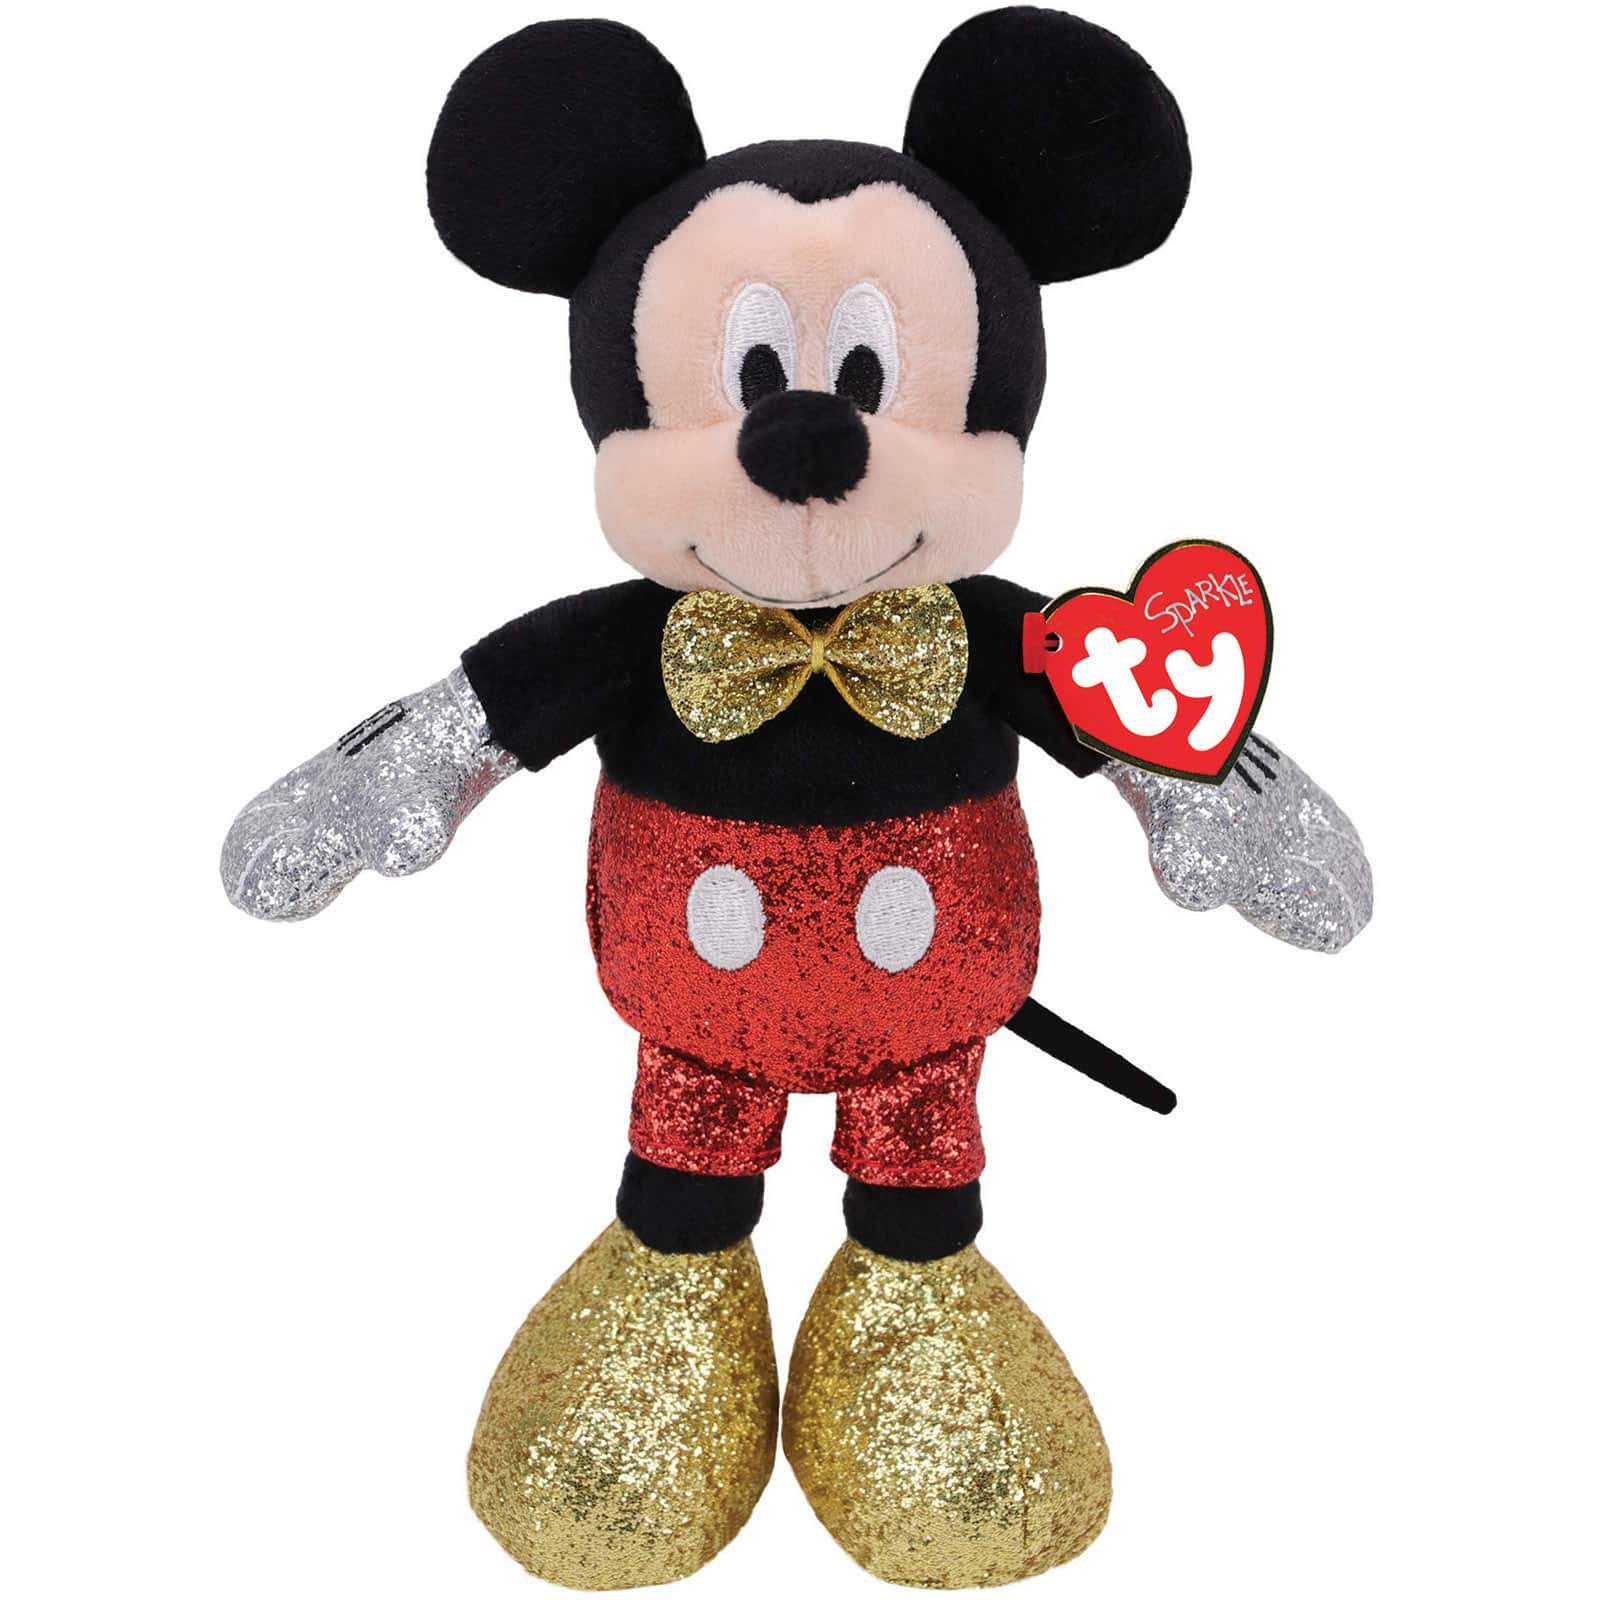 TY Sparkle Mickey Mouse